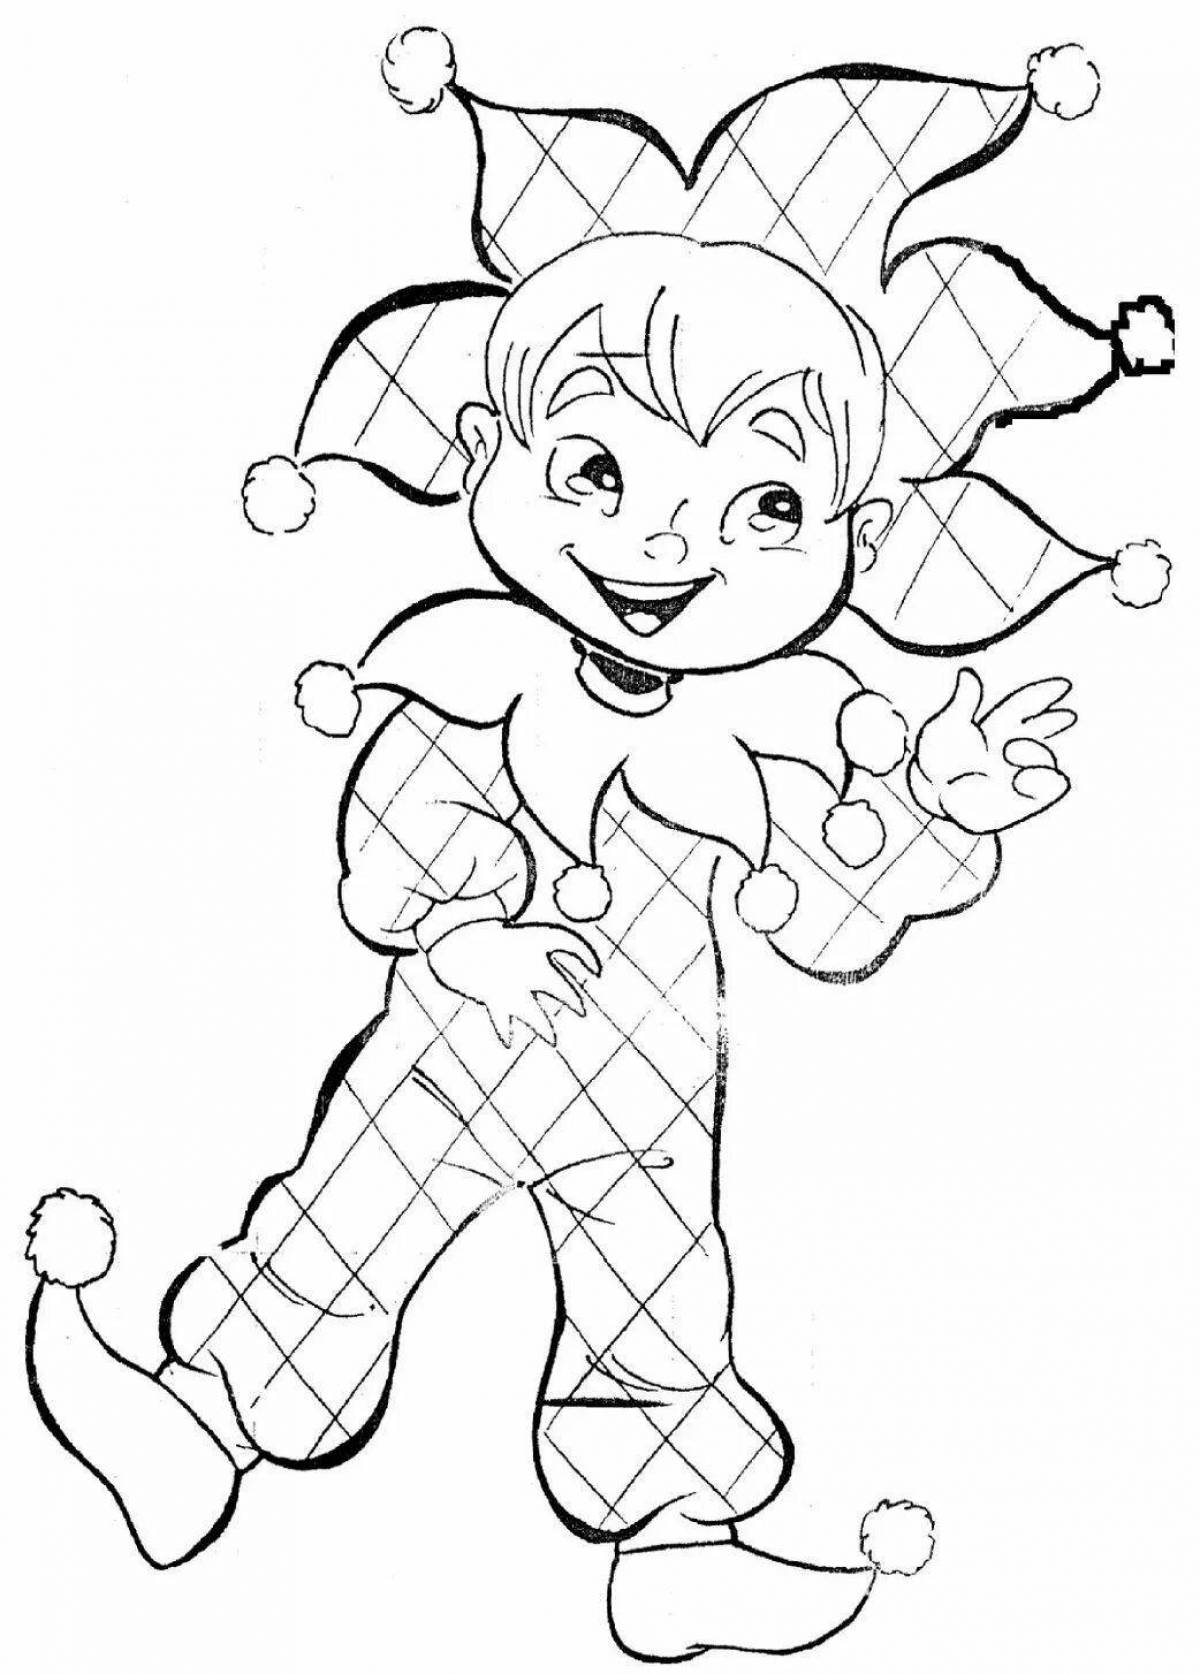 Attractive parsley character coloring page